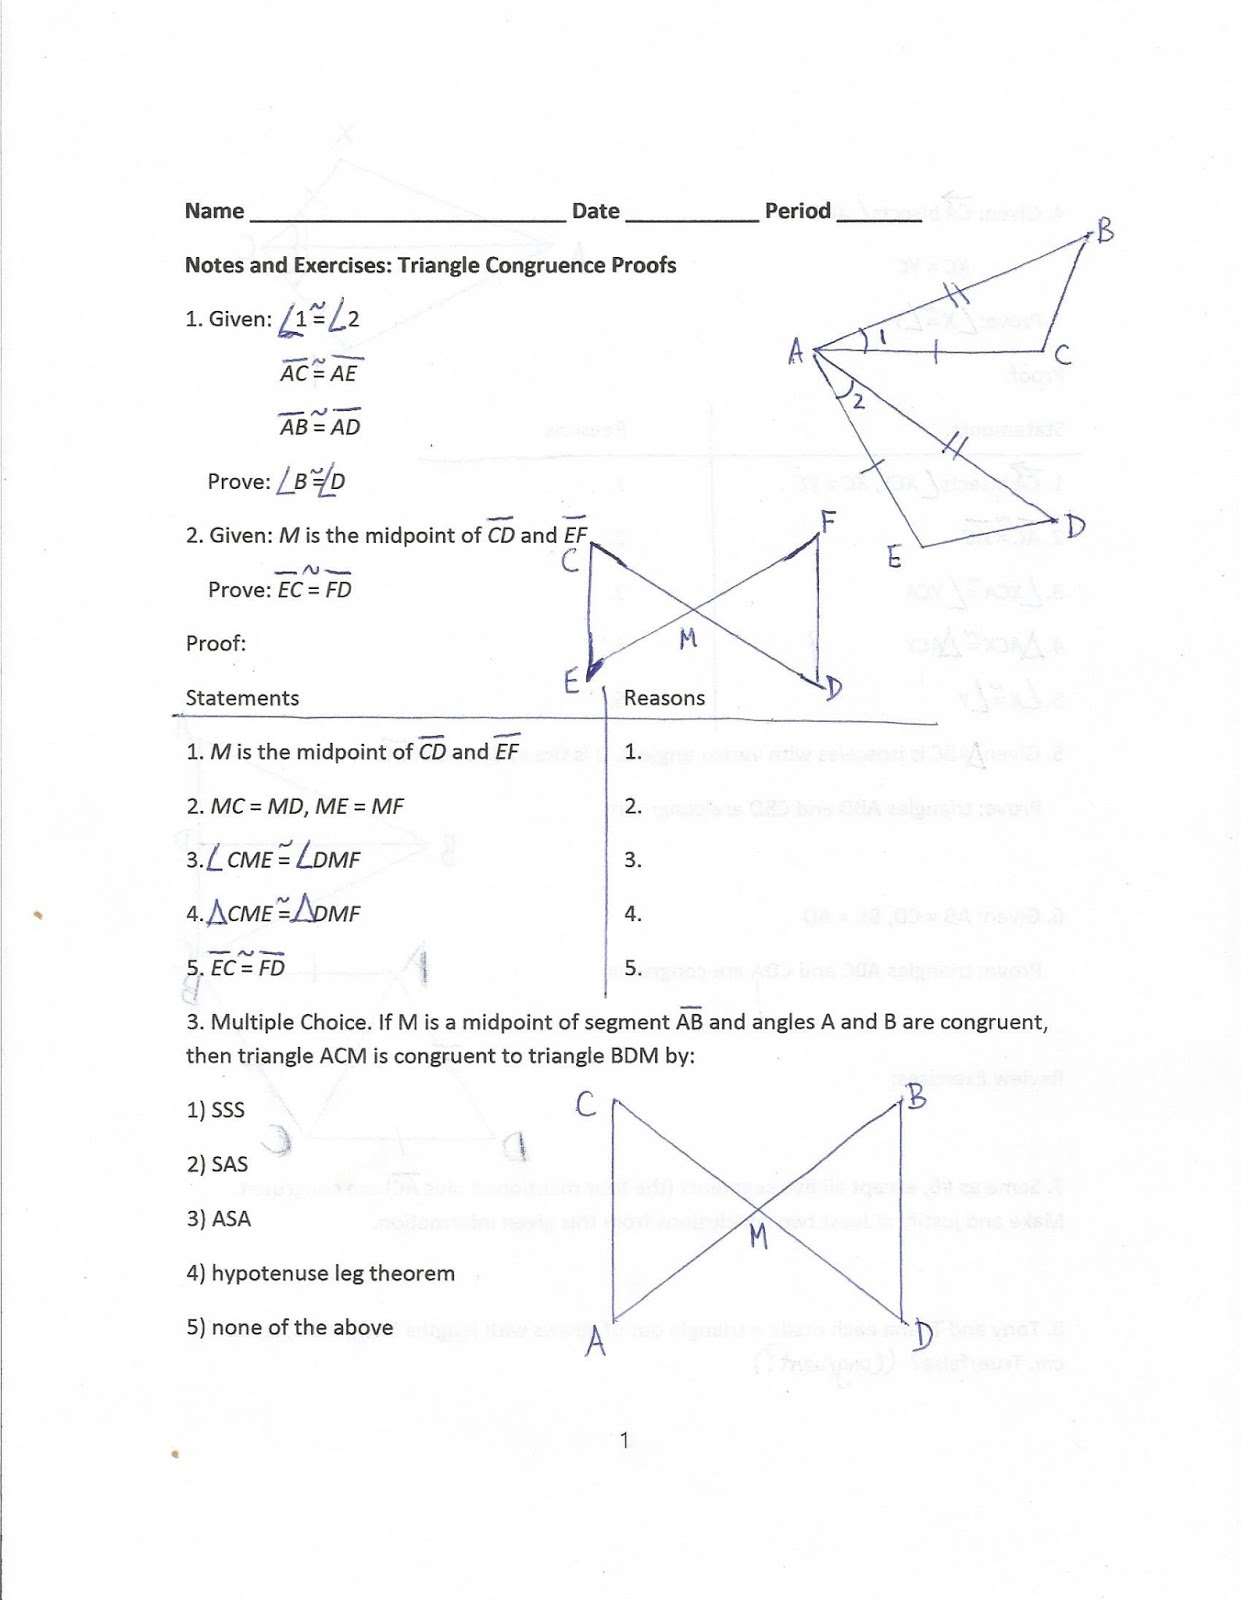 additional triangle proof common core geometry homework answers